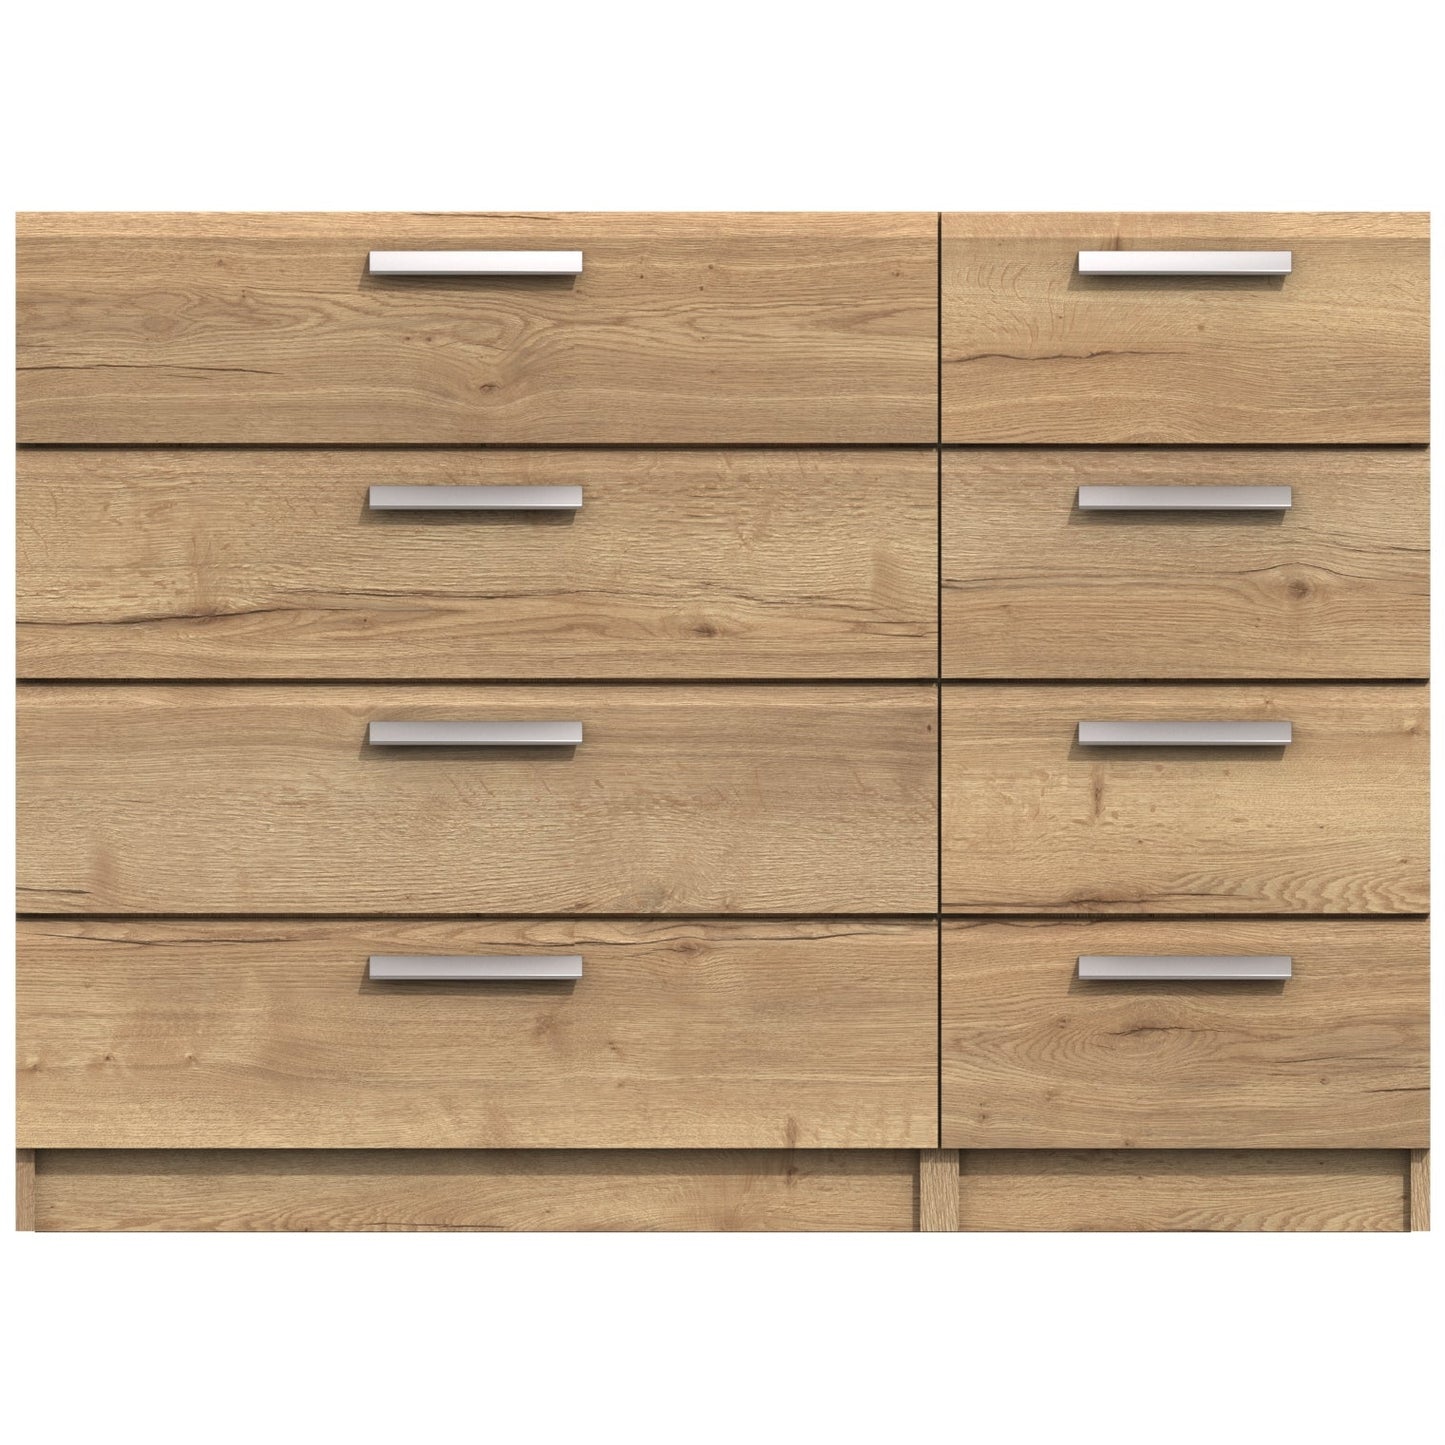 Waterfall 8 Drawer chest Natural Rustic Oak